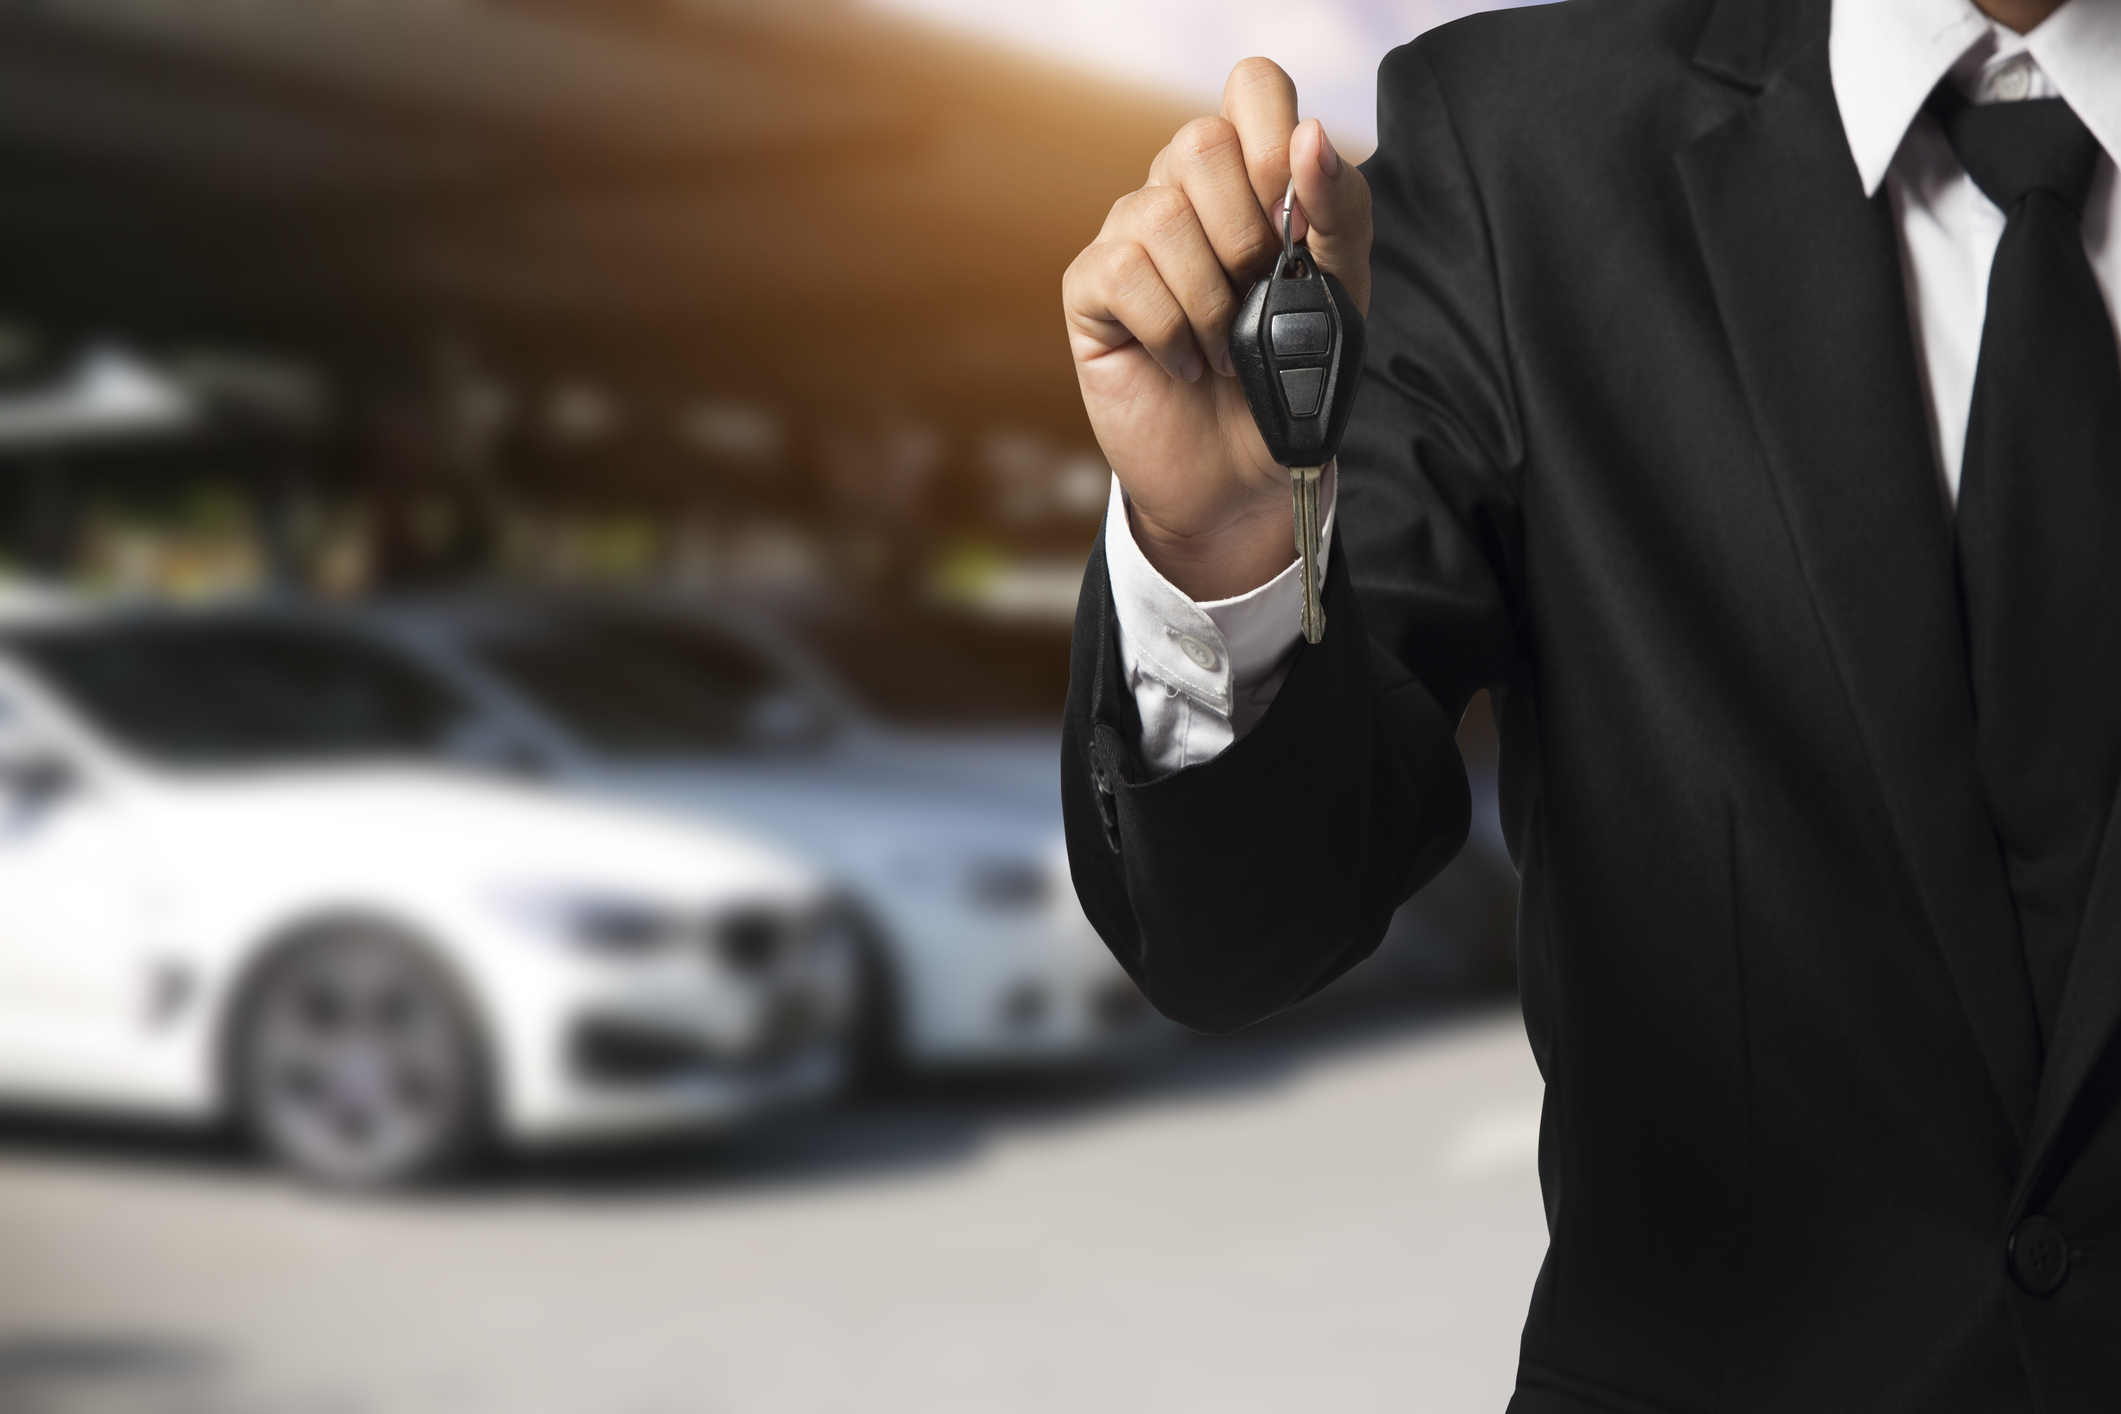 4 Things to Consider When Getting a Service Contract for a Used Vehicle